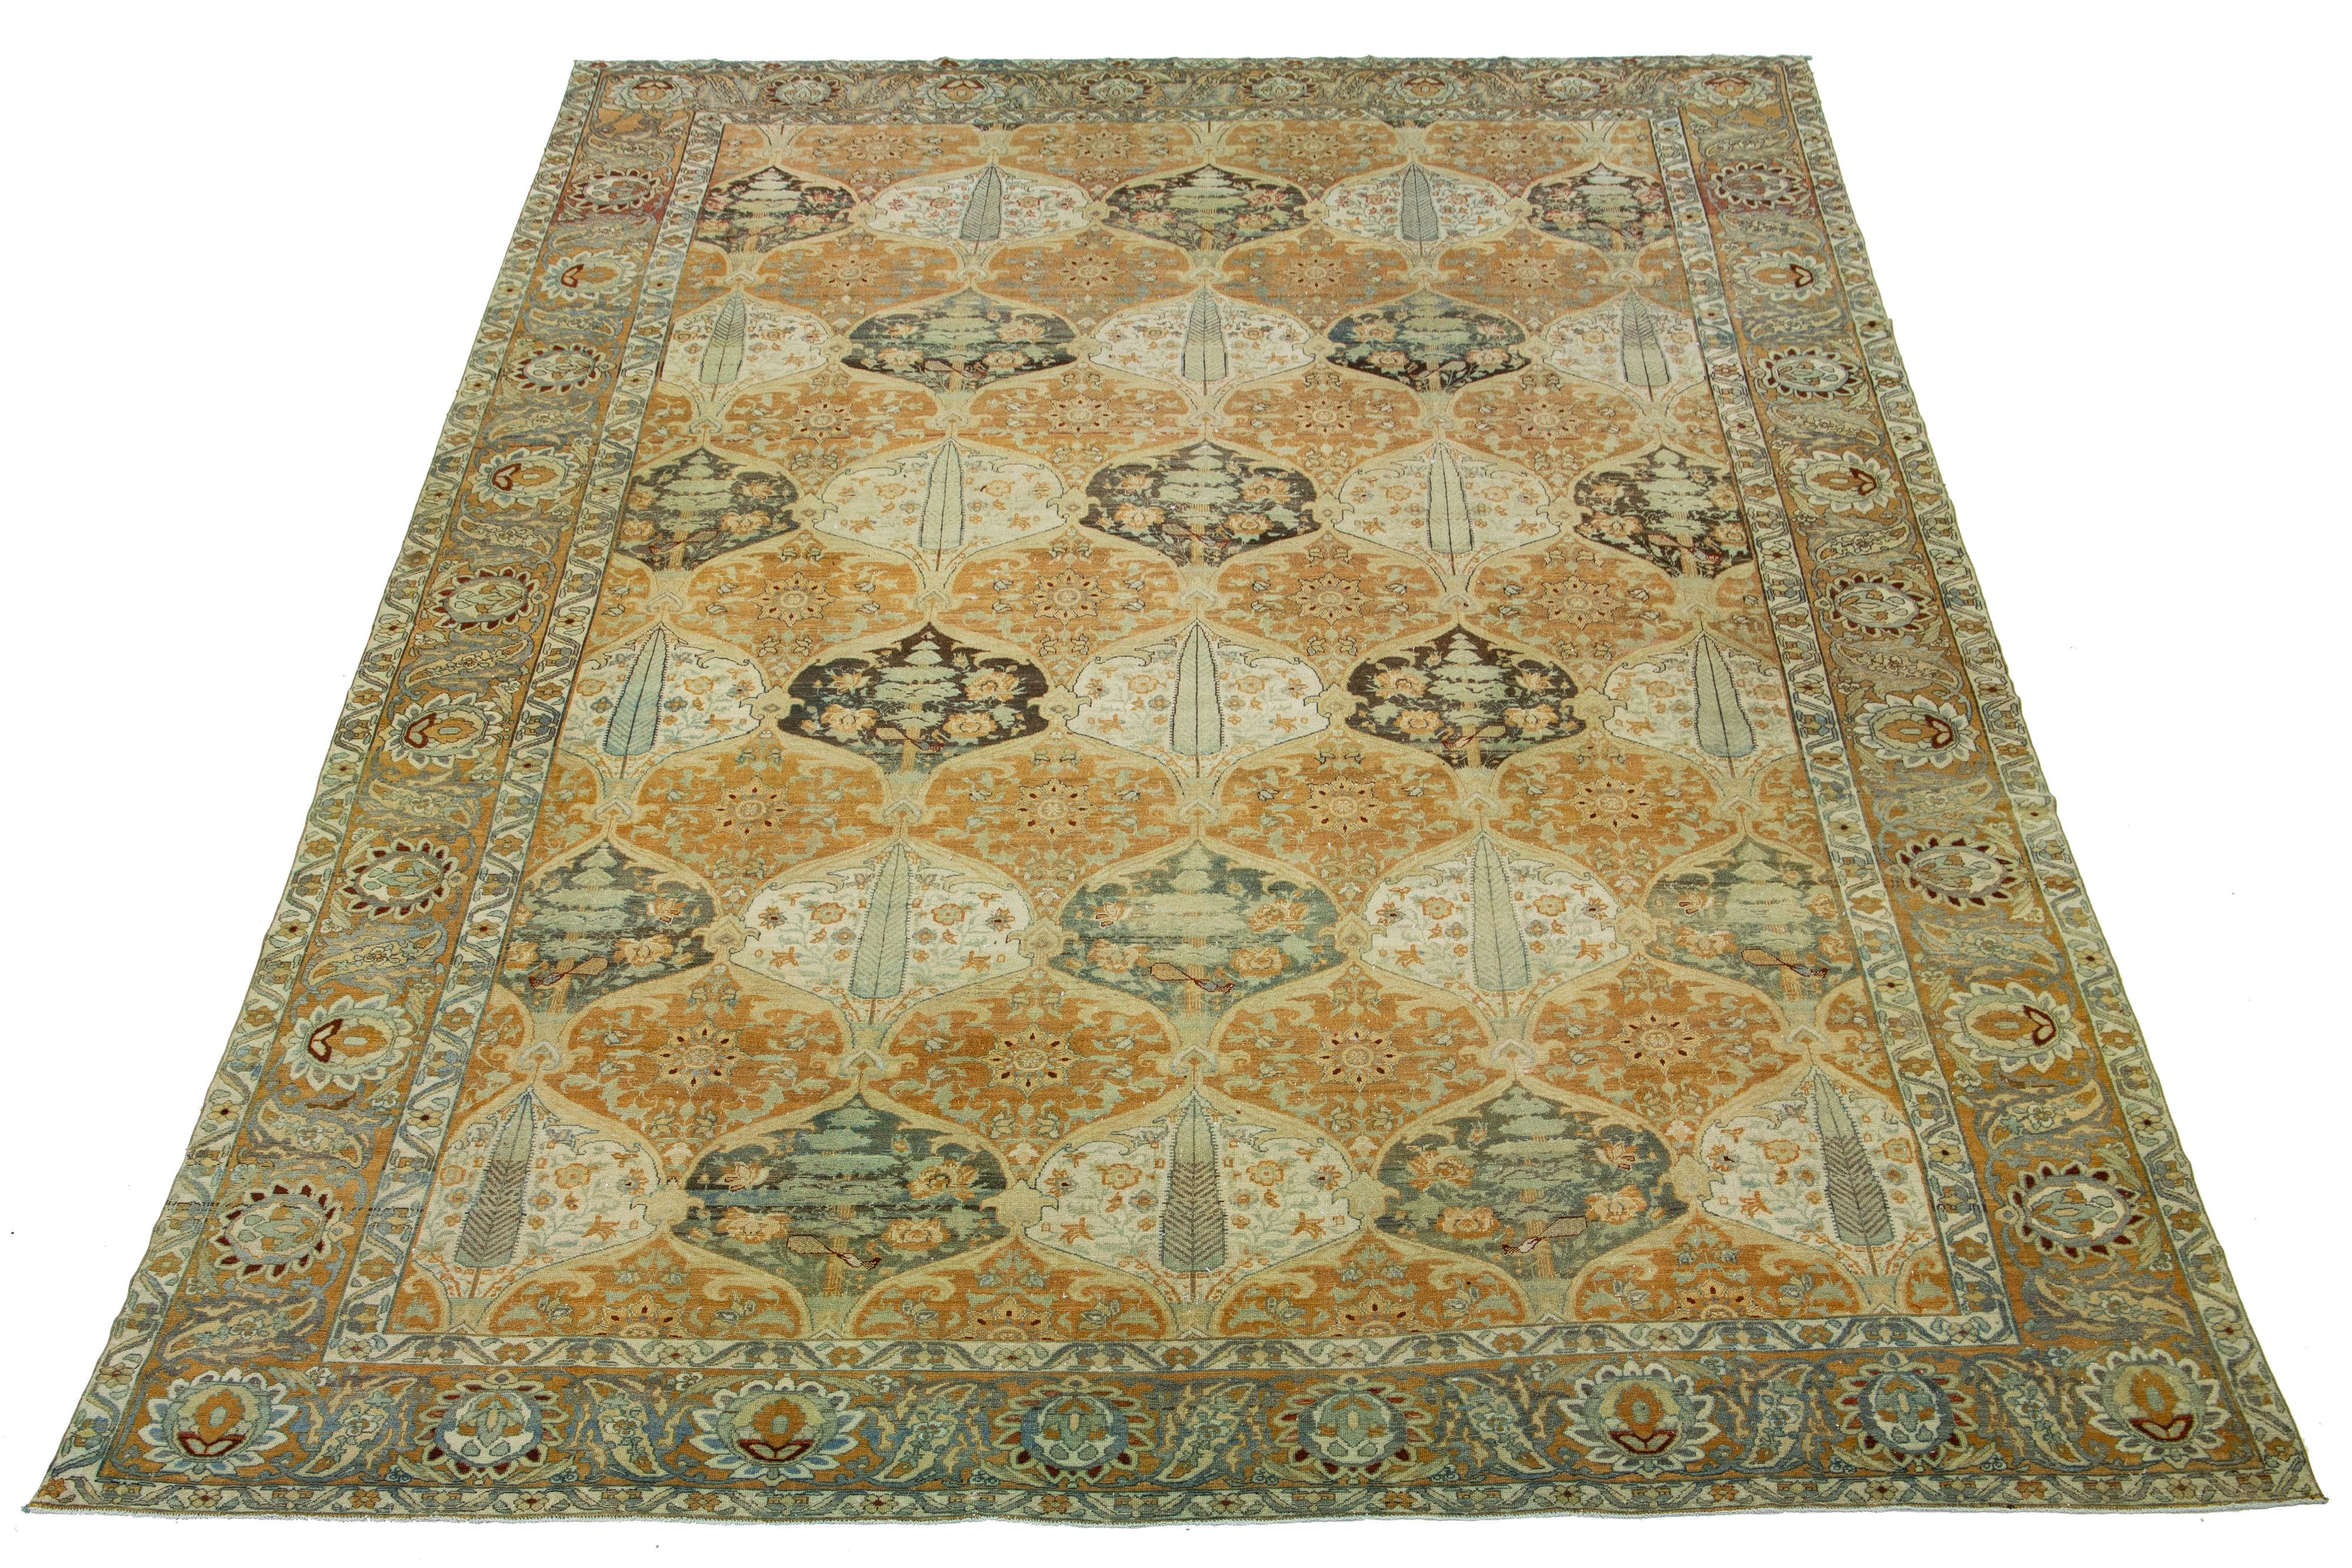 Beautiful Antique Bakhtiari hand-knotted wool rug featuring an orange-colored field. This exquisite Persian rug showcases a classic geometric floral design with blue, beige, red-rust, and gray hues.

This rug measures 13'3